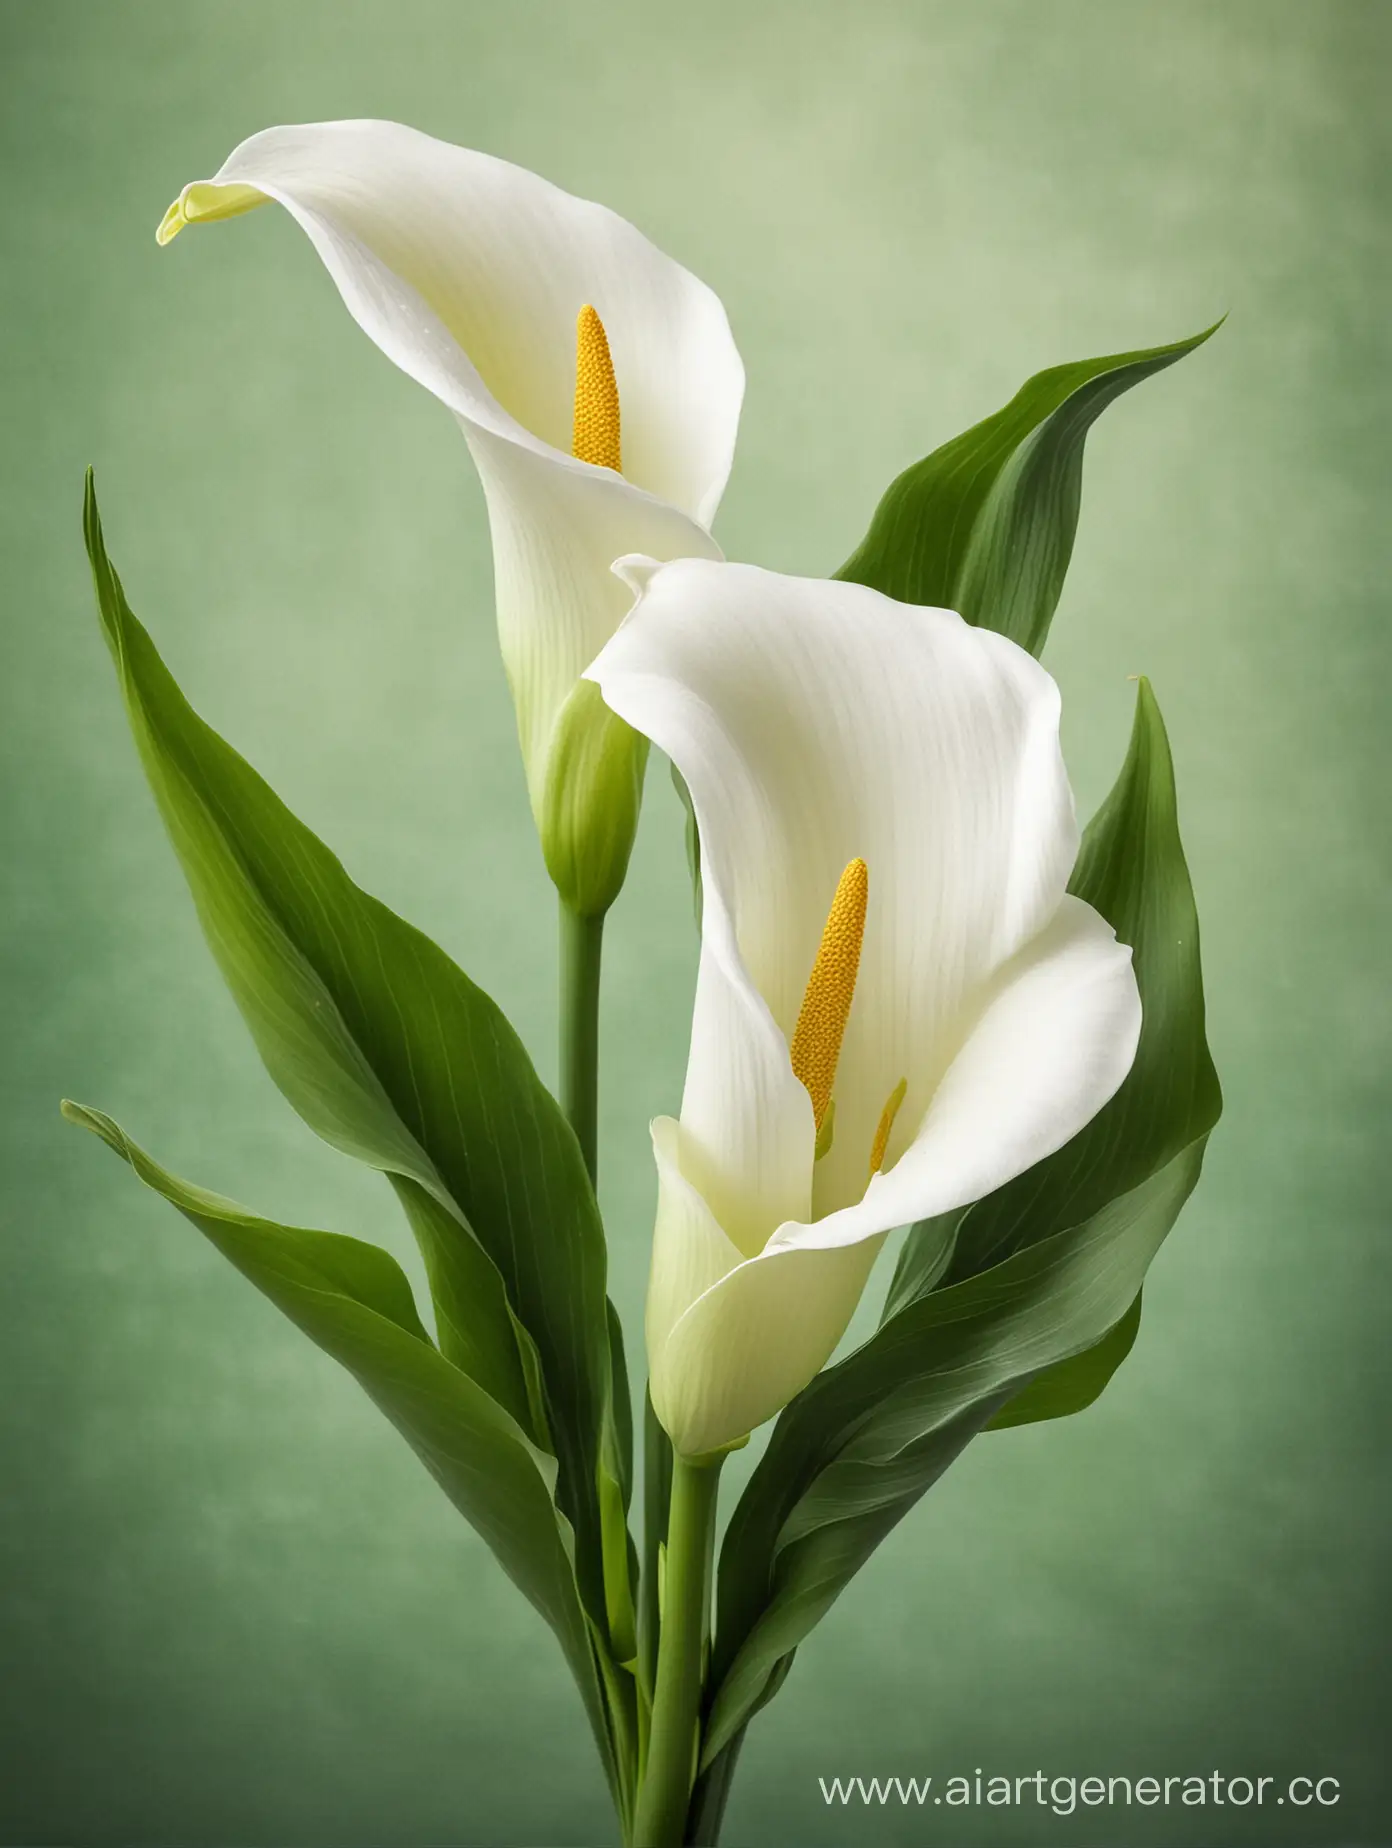 Vibrant-Calla-Lily-Flowers-on-Green-Background